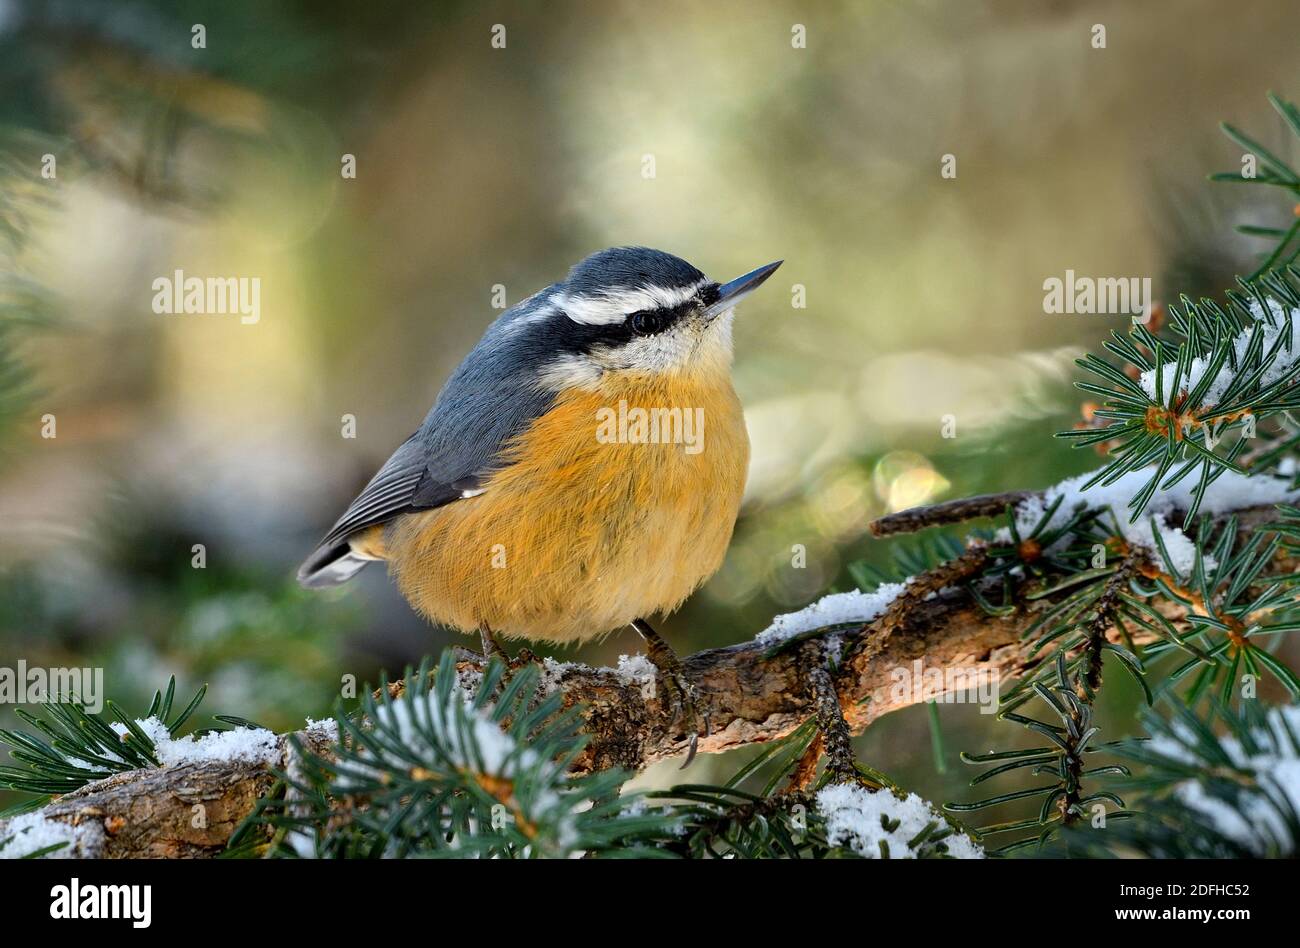 A Red-breasted Nuthatch bird 'Sitta canadensis', perched on a snowy green spruce tree branch in rural Alberta Canada Stock Photo